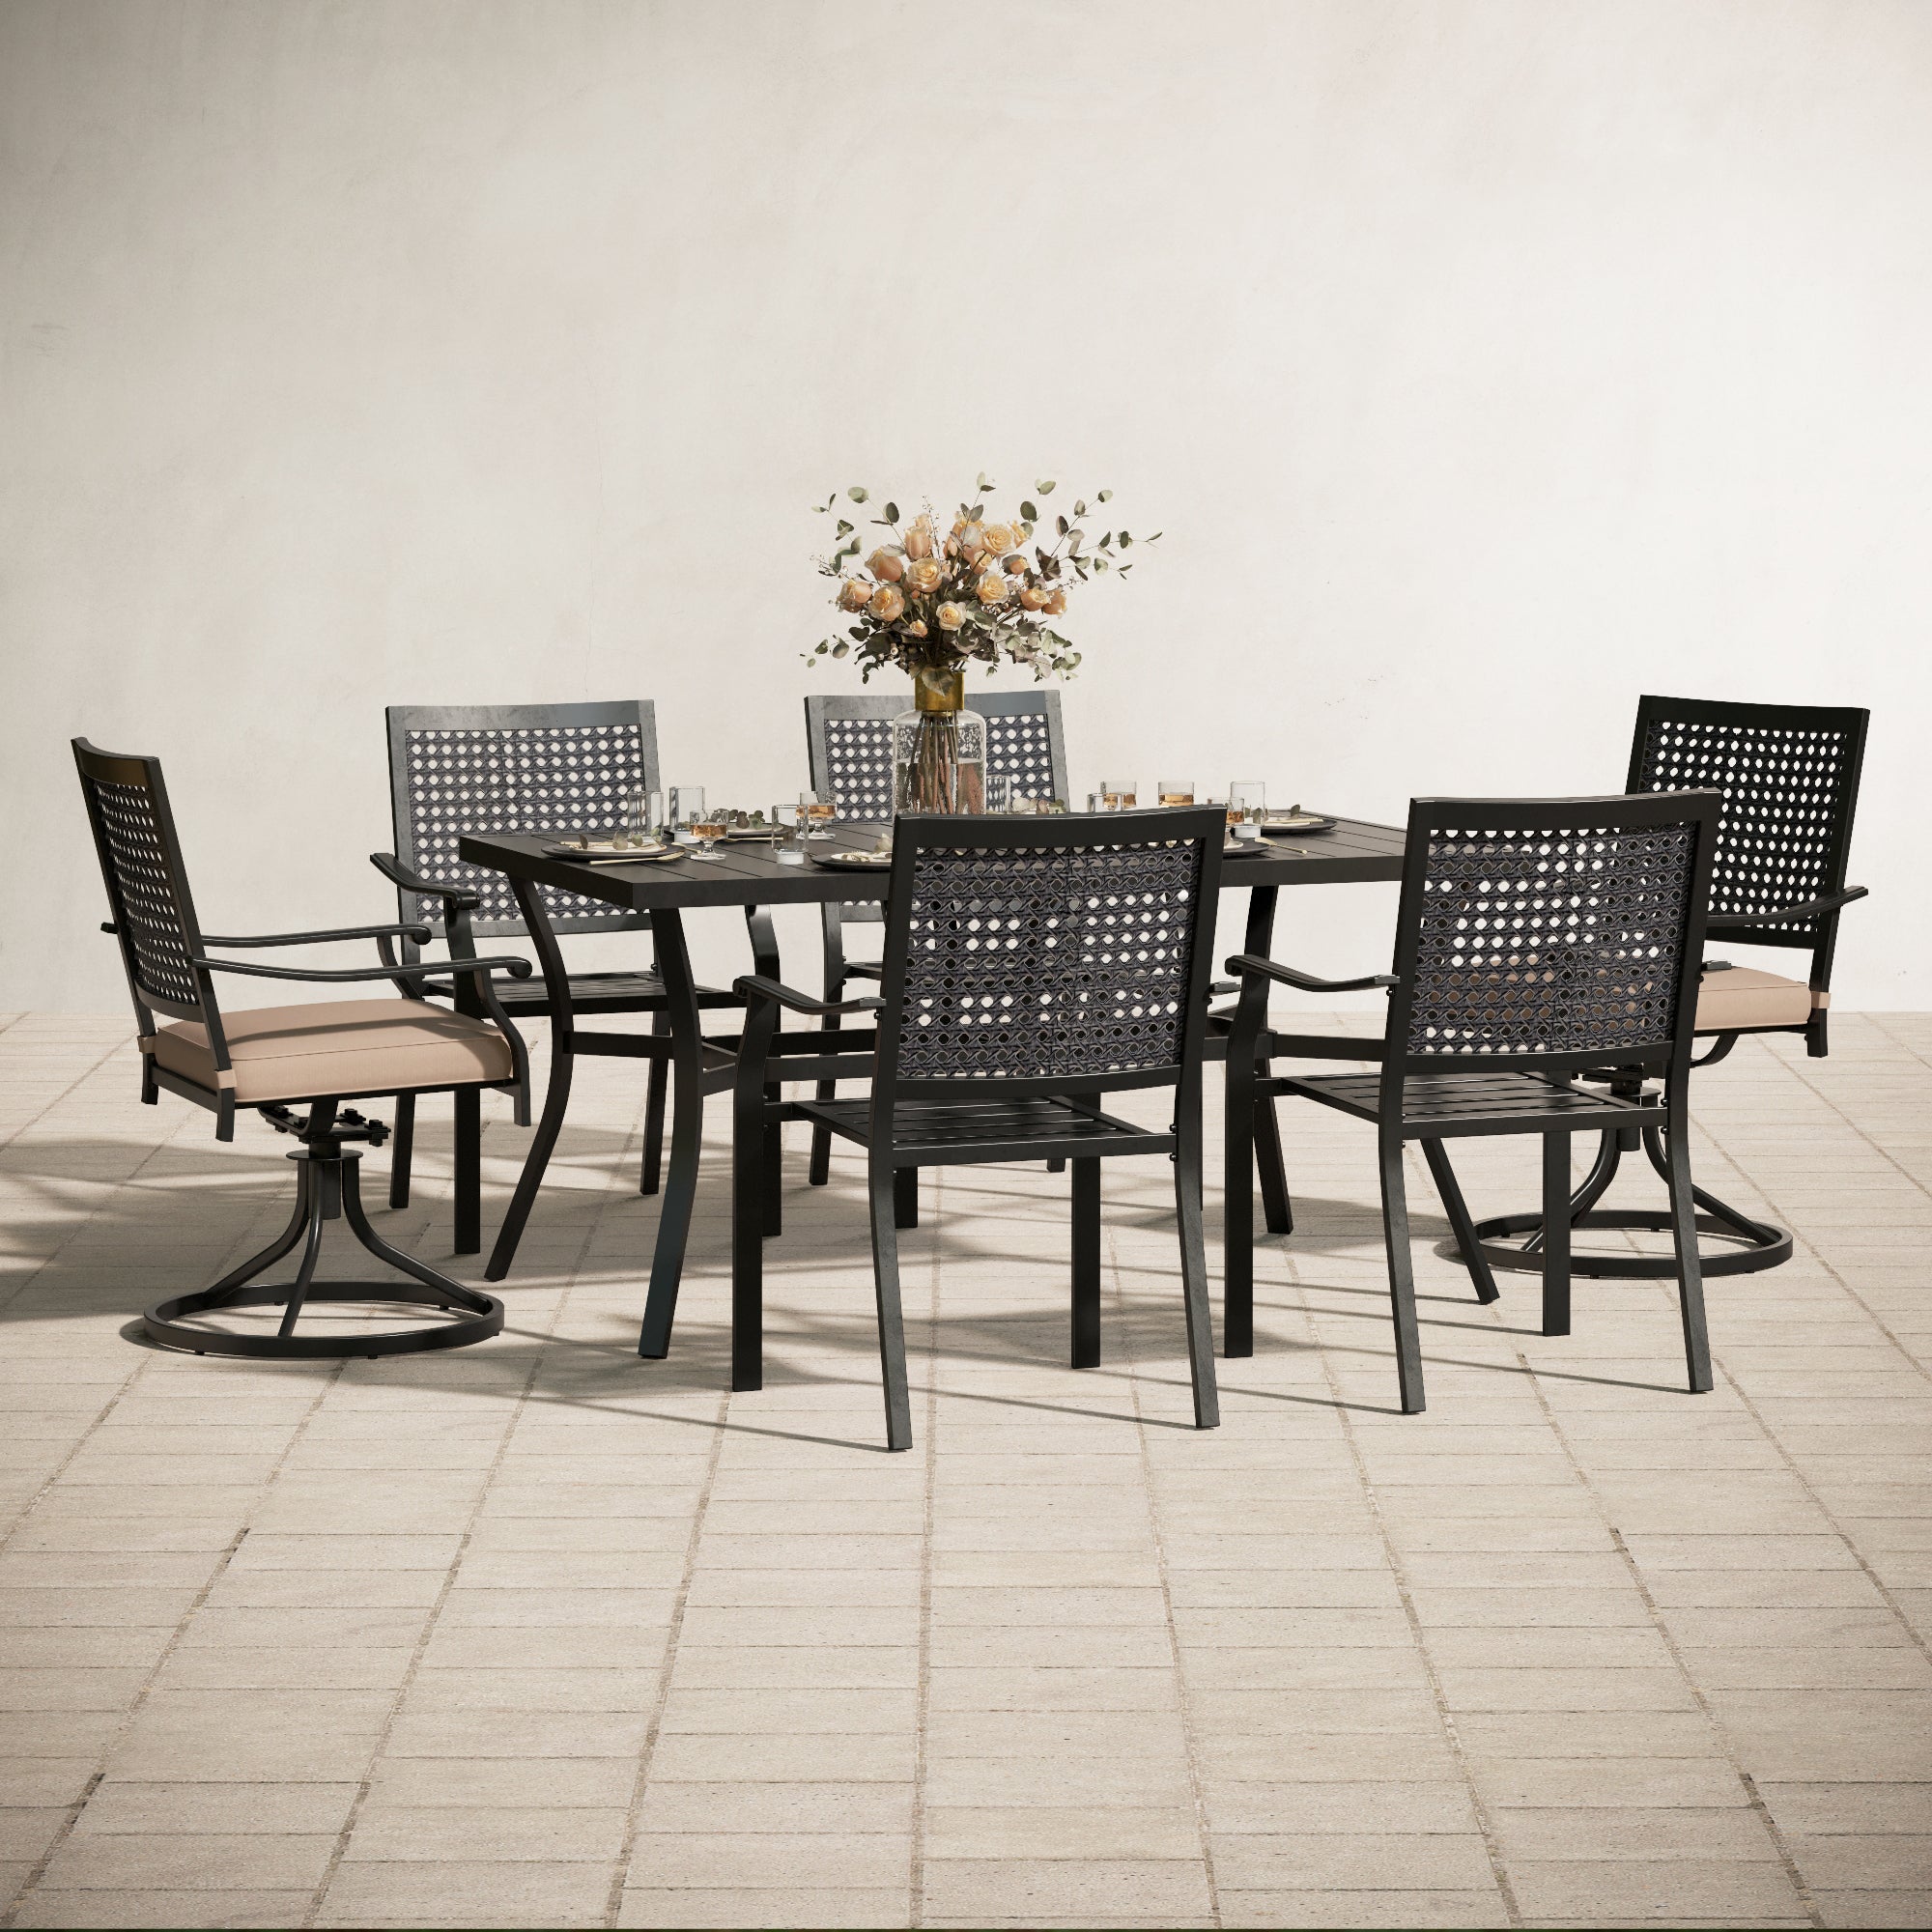 MFSTUDIO 7-Piece Outdoor Dining Set Steel Panel Table & Bull's Eye Pattern Dining Chairs